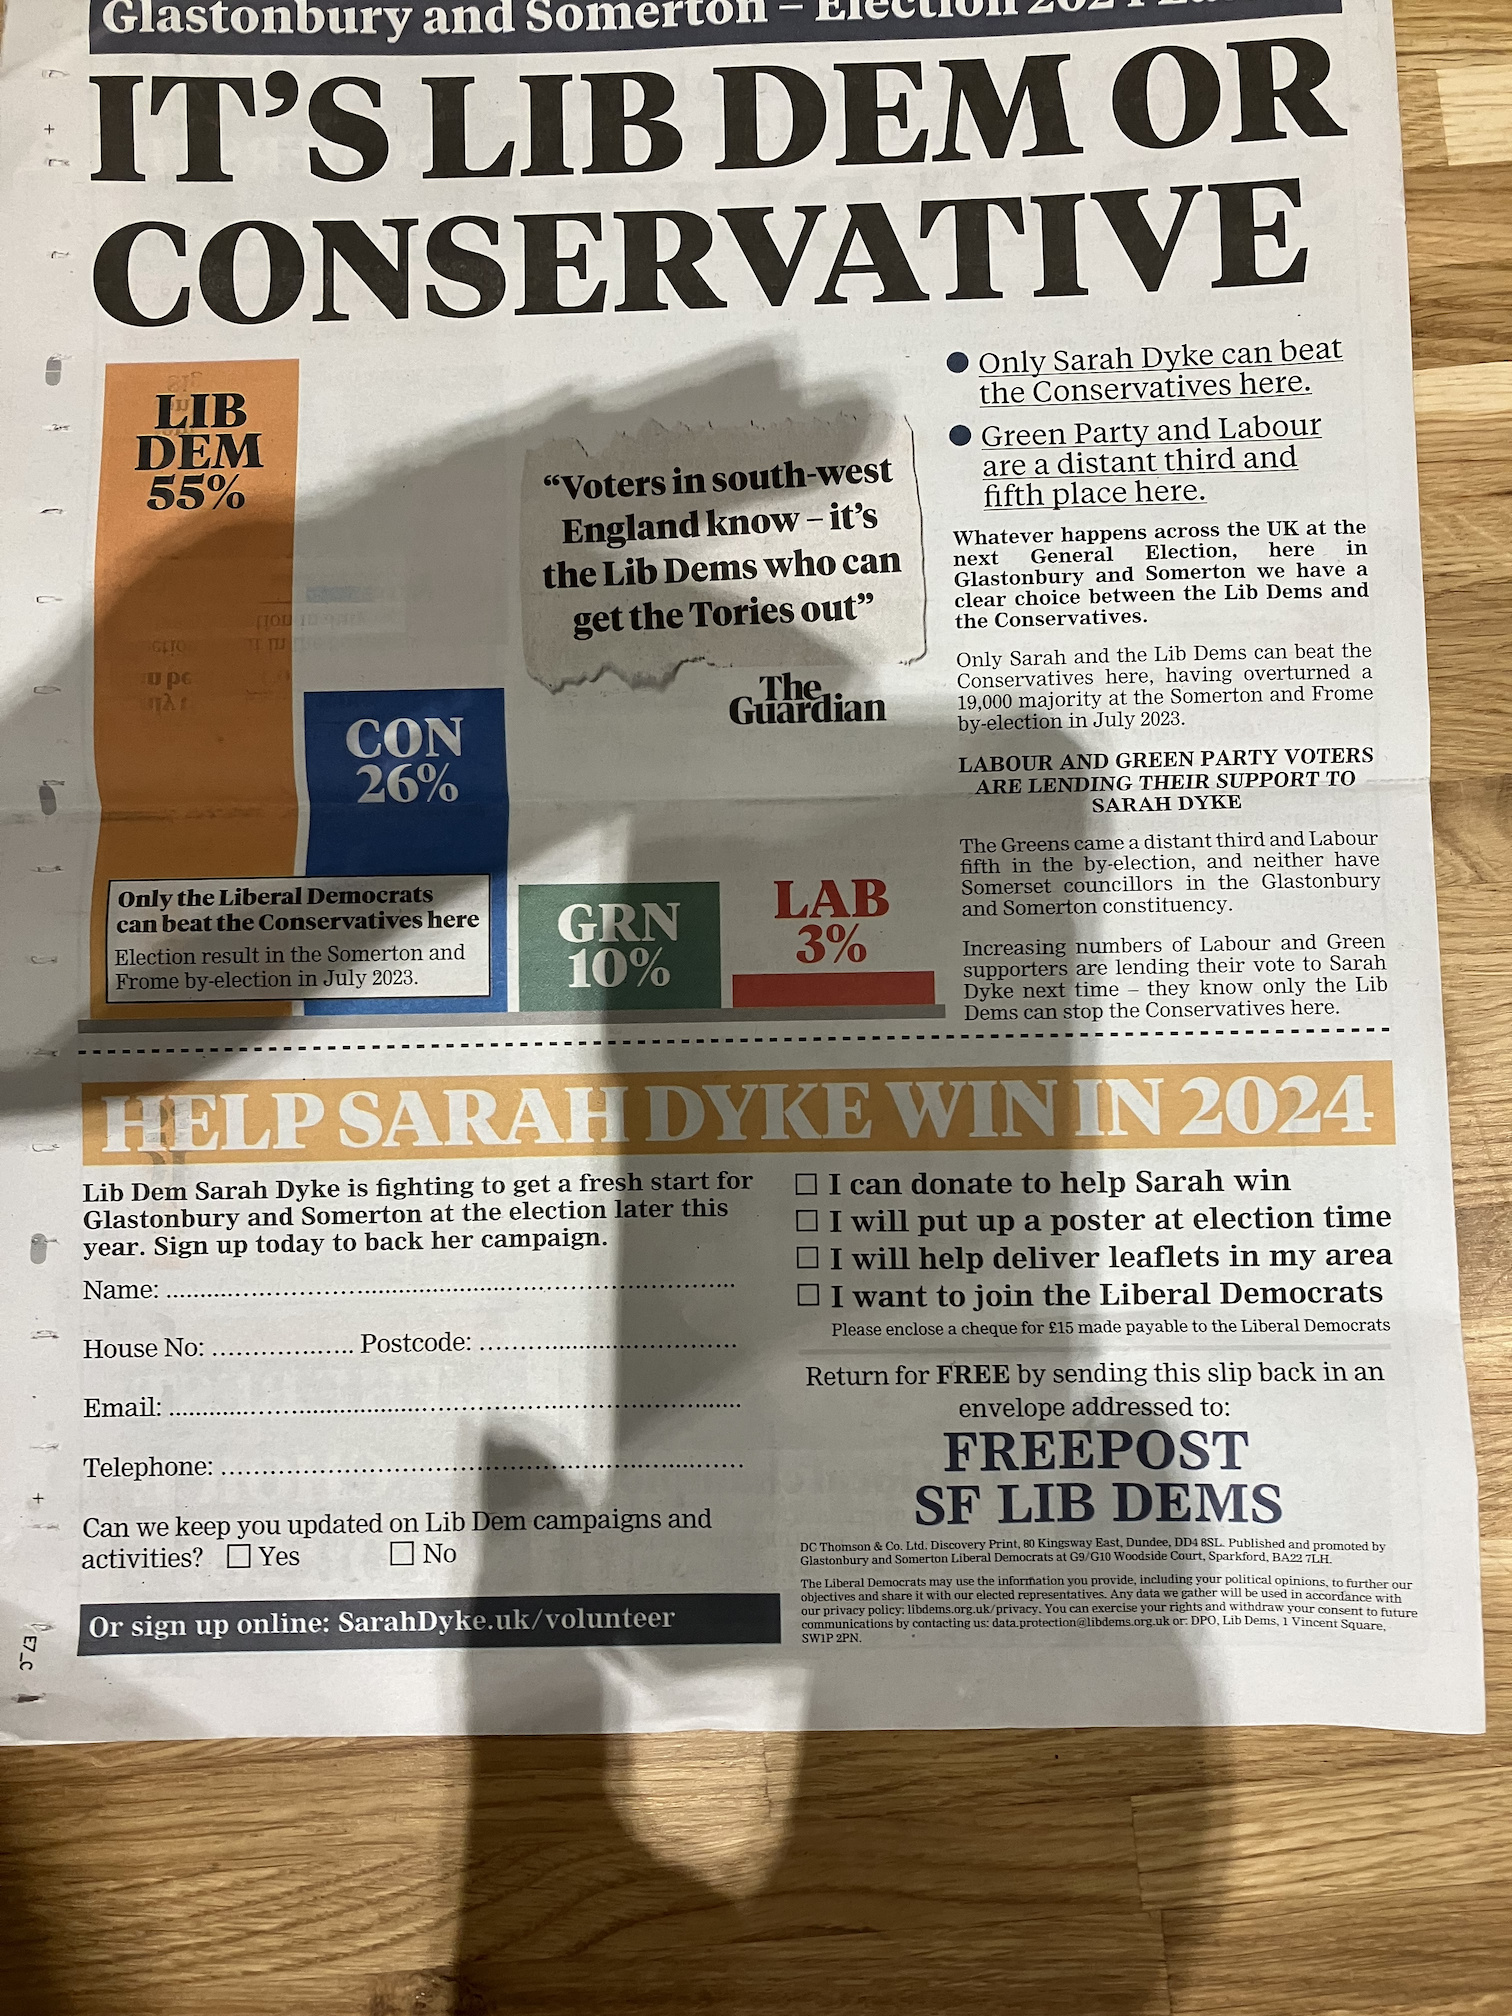 An image of a Liberal Democrat campaign leaflet, resembling a newspaper, depicting a bar chart.